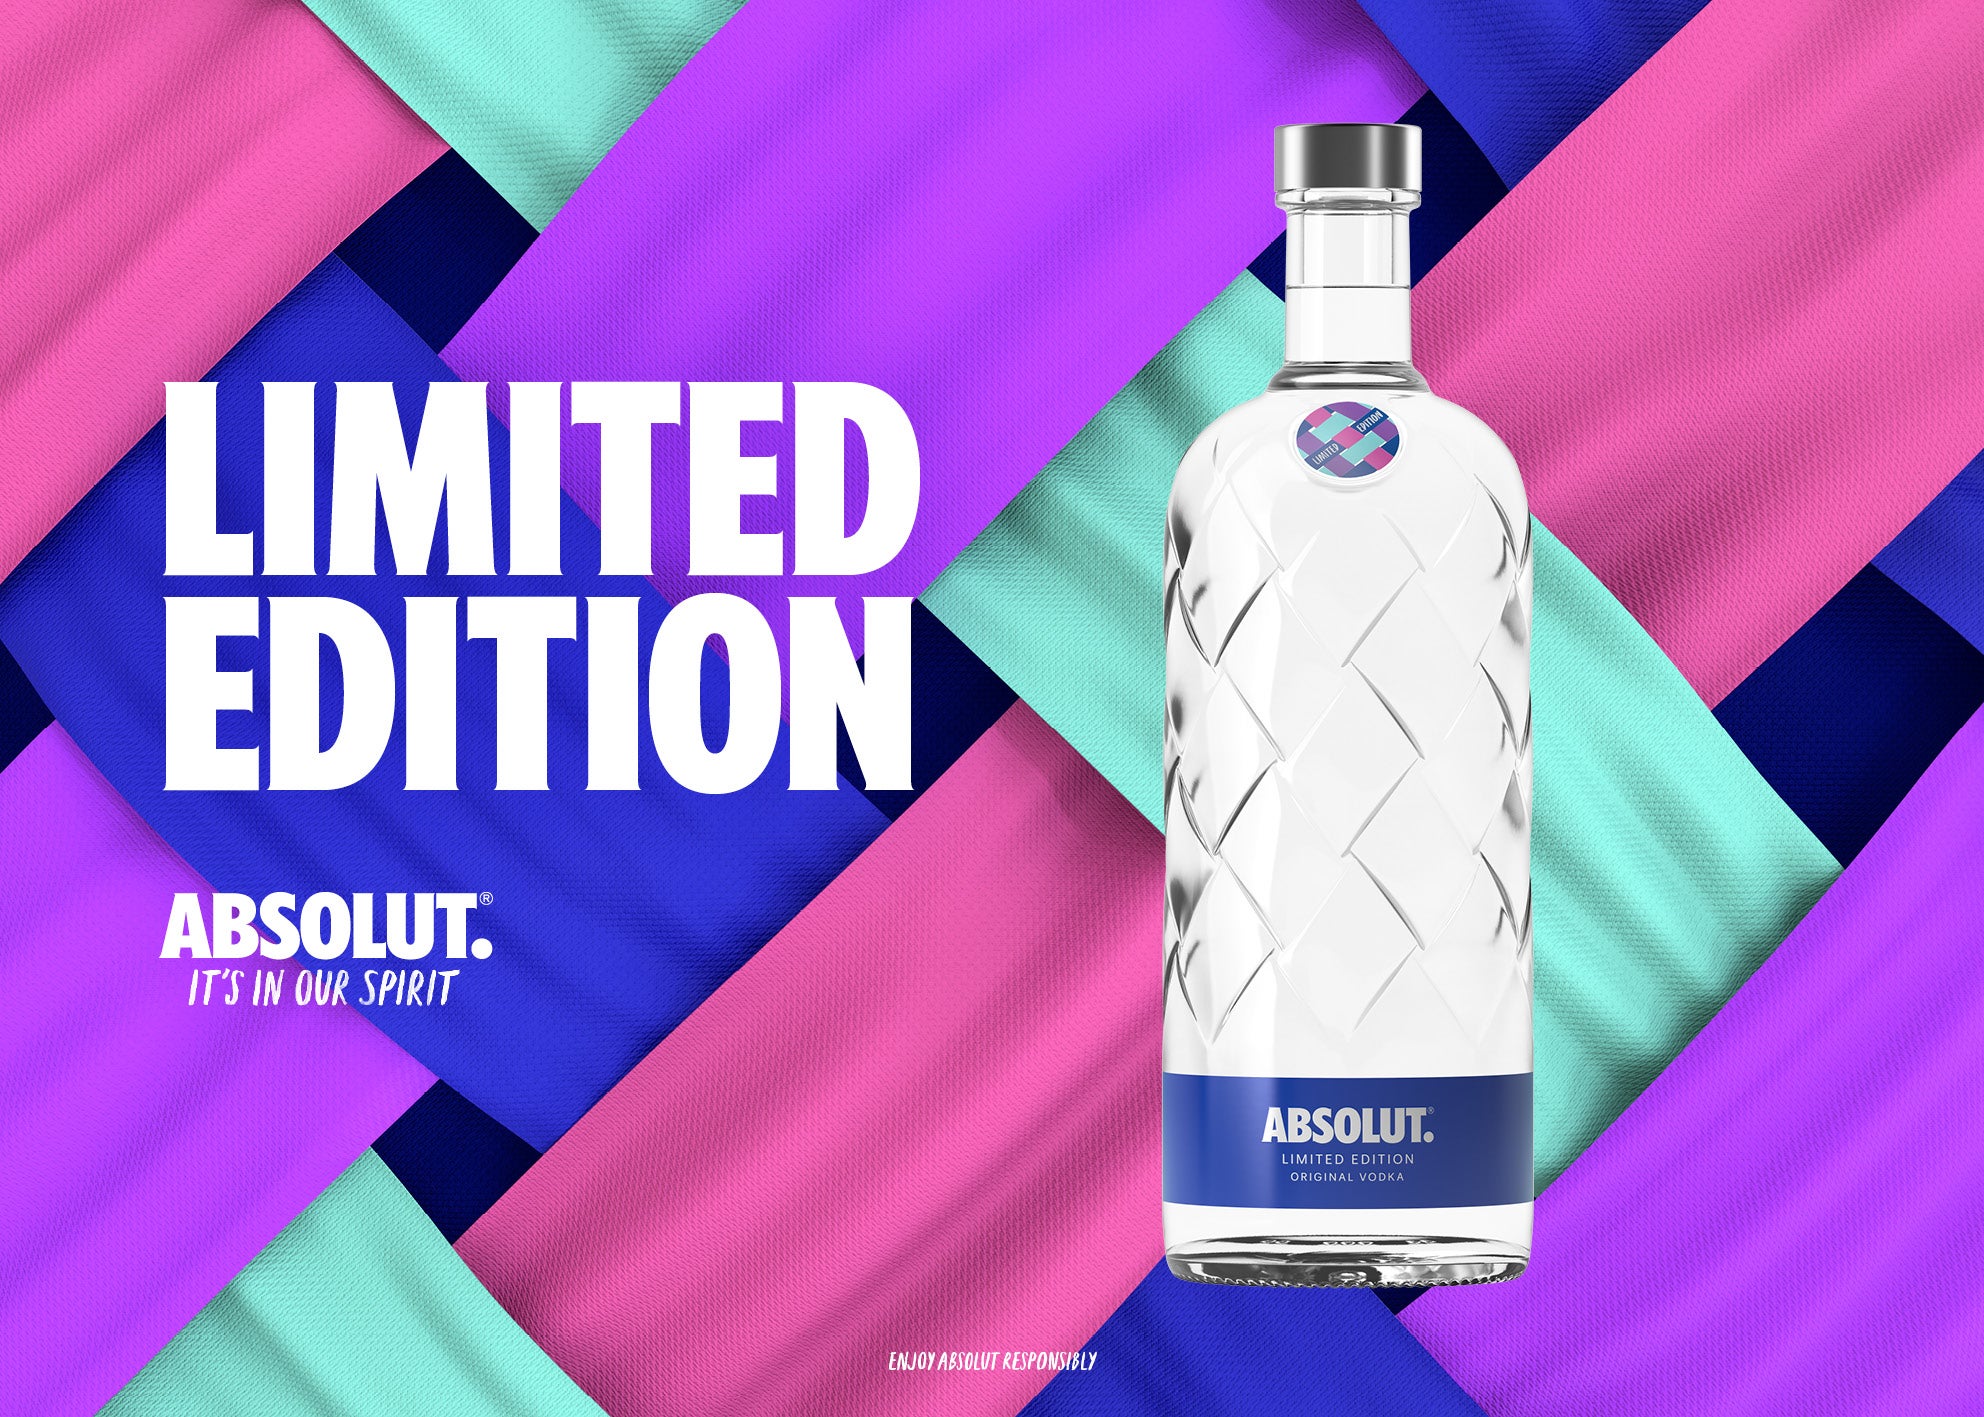 ABSOLUT VODKA LAUNCHES NEW LIMITEDEDITION BOTTLE CELEBRATING THE POWER